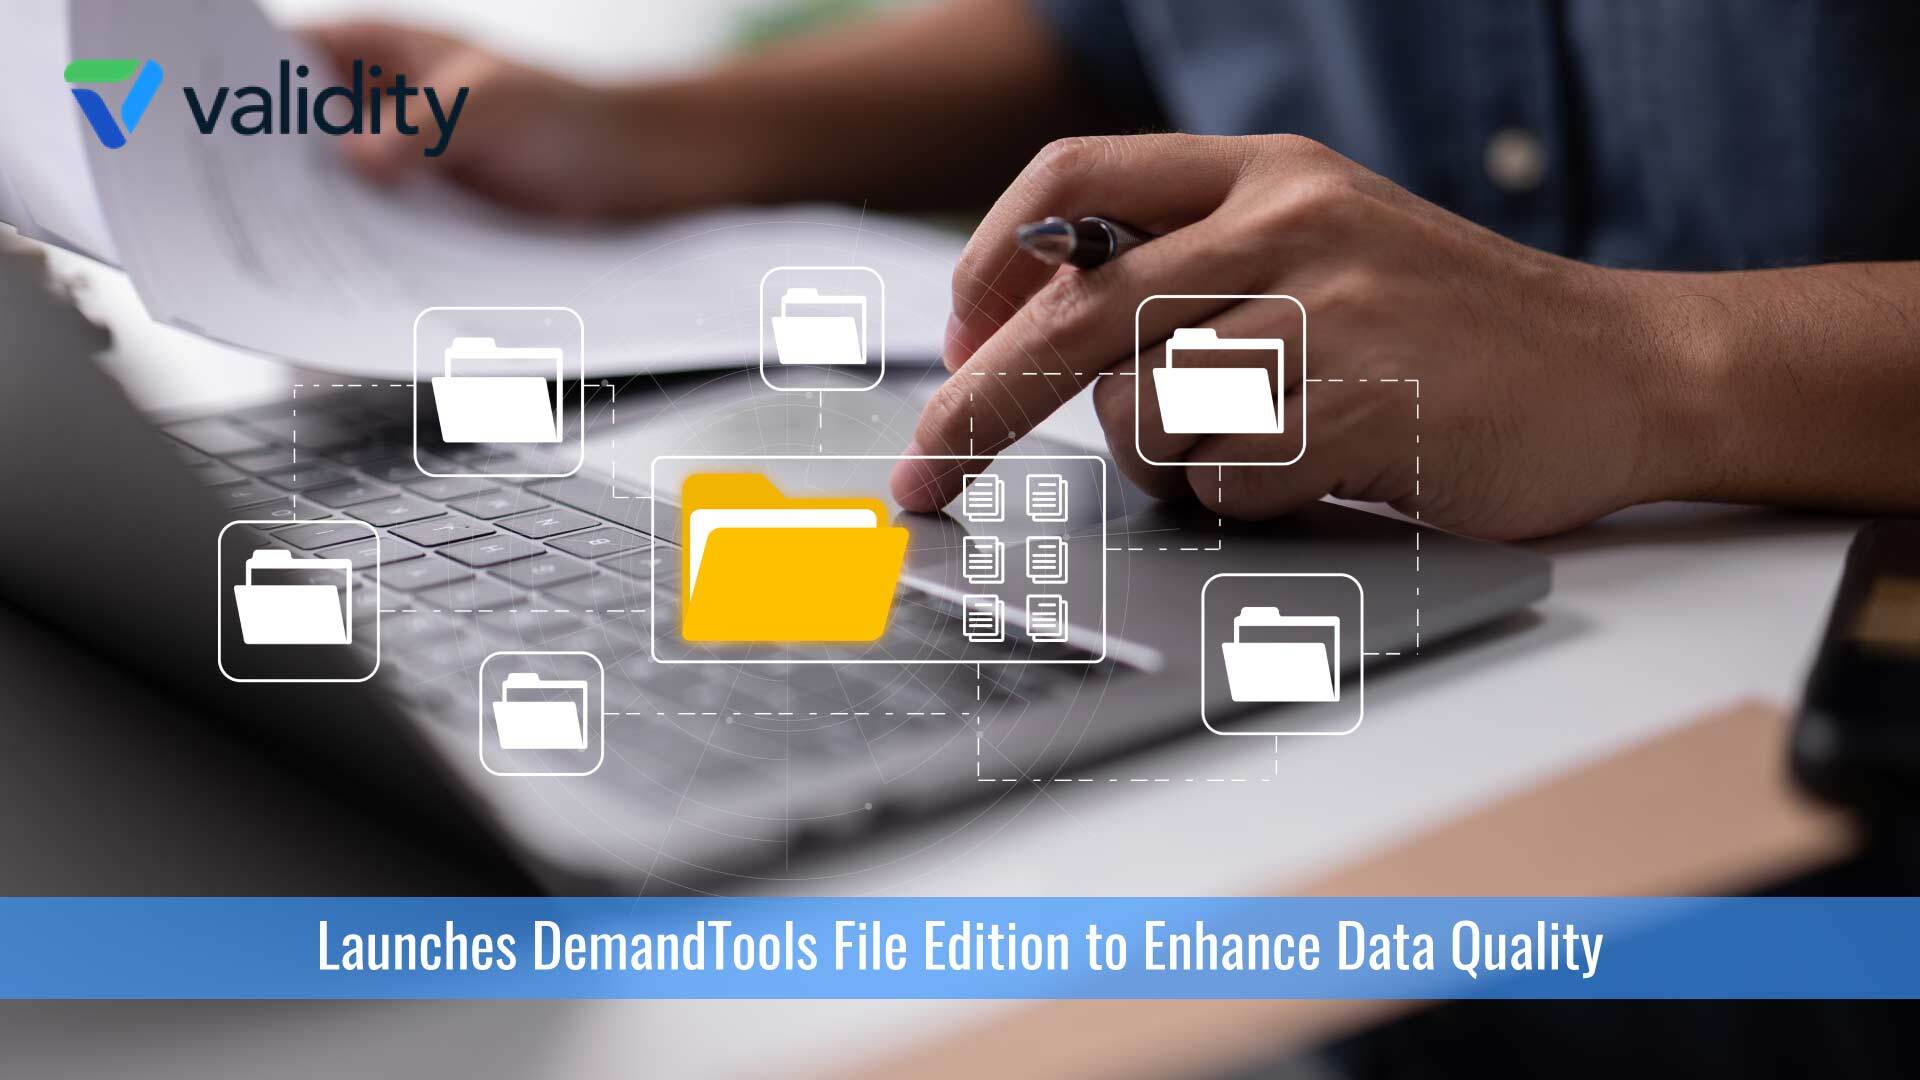 Validity Launches DemandTools File Edition To Enhance Data Quality and Improve Spreadsheet Usability